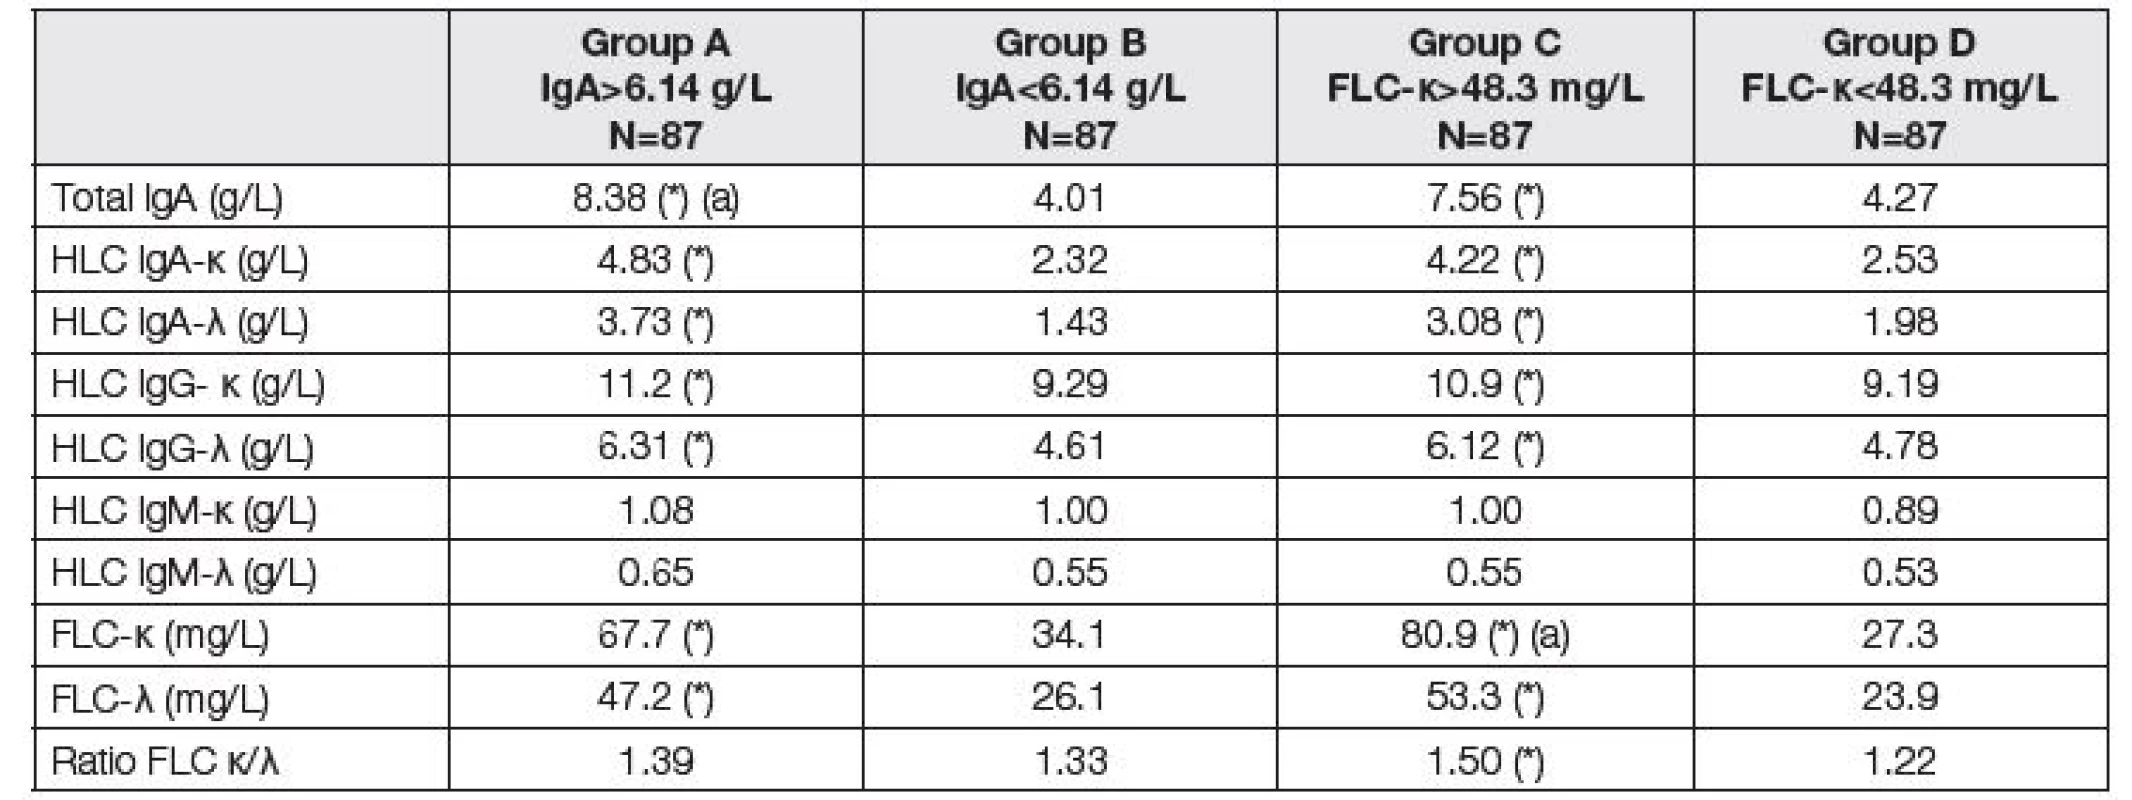 Medians of immunoglobulin compounds before LTx. Comparison of two subgroups with respect to different criteria.
Groups A and B according to the total IgA; group A above median of 6.14 g/L, group B up to median of 6.14 g/L. Groups C
and D according to the FLC-κ; group C above median of 48.3 mg/L, group D up to median of 48.3 mg/L). Asterisk (*) means
significant difference between group A and B, or C and D, respectively (Mann-Whitney test). Symbol (a) means that the variable
was used for classification to the respective group.